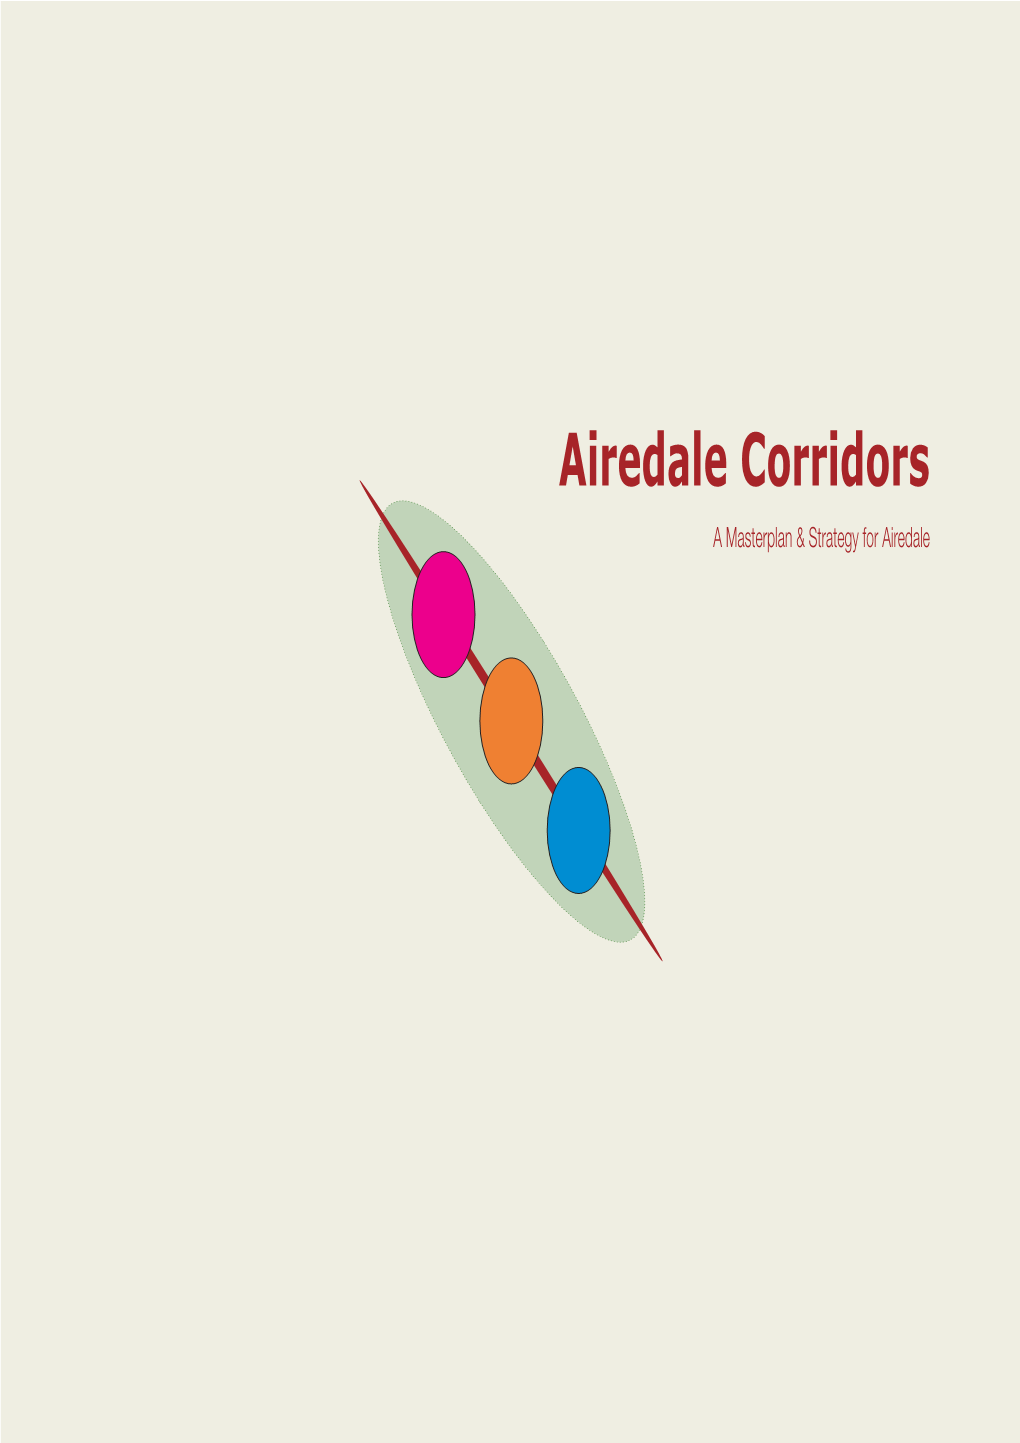 Airedale Corridors a Masterplan & Strategy for Airedale Rural Airedale Airedale Corridors a Masterplan & Strategy for Airedale